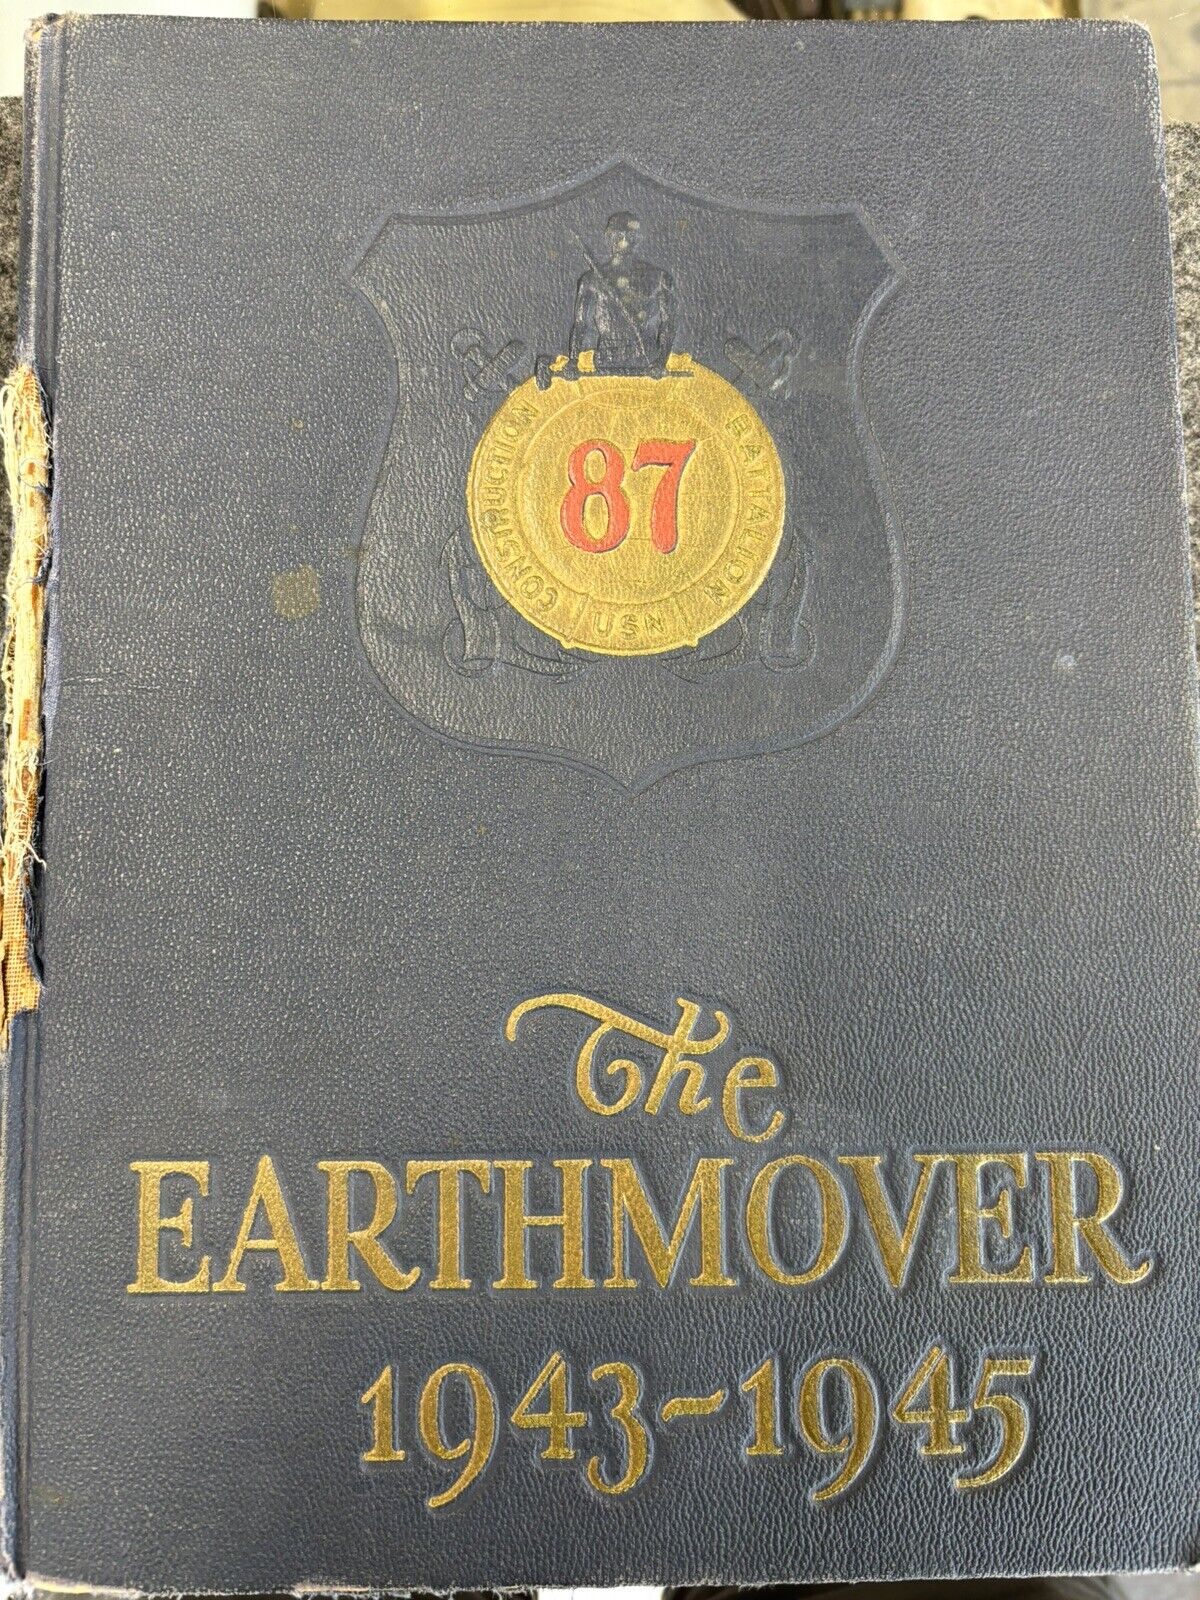 The Earthmover 1943-1945 Unit History of the 87th Naval Construction Battalion